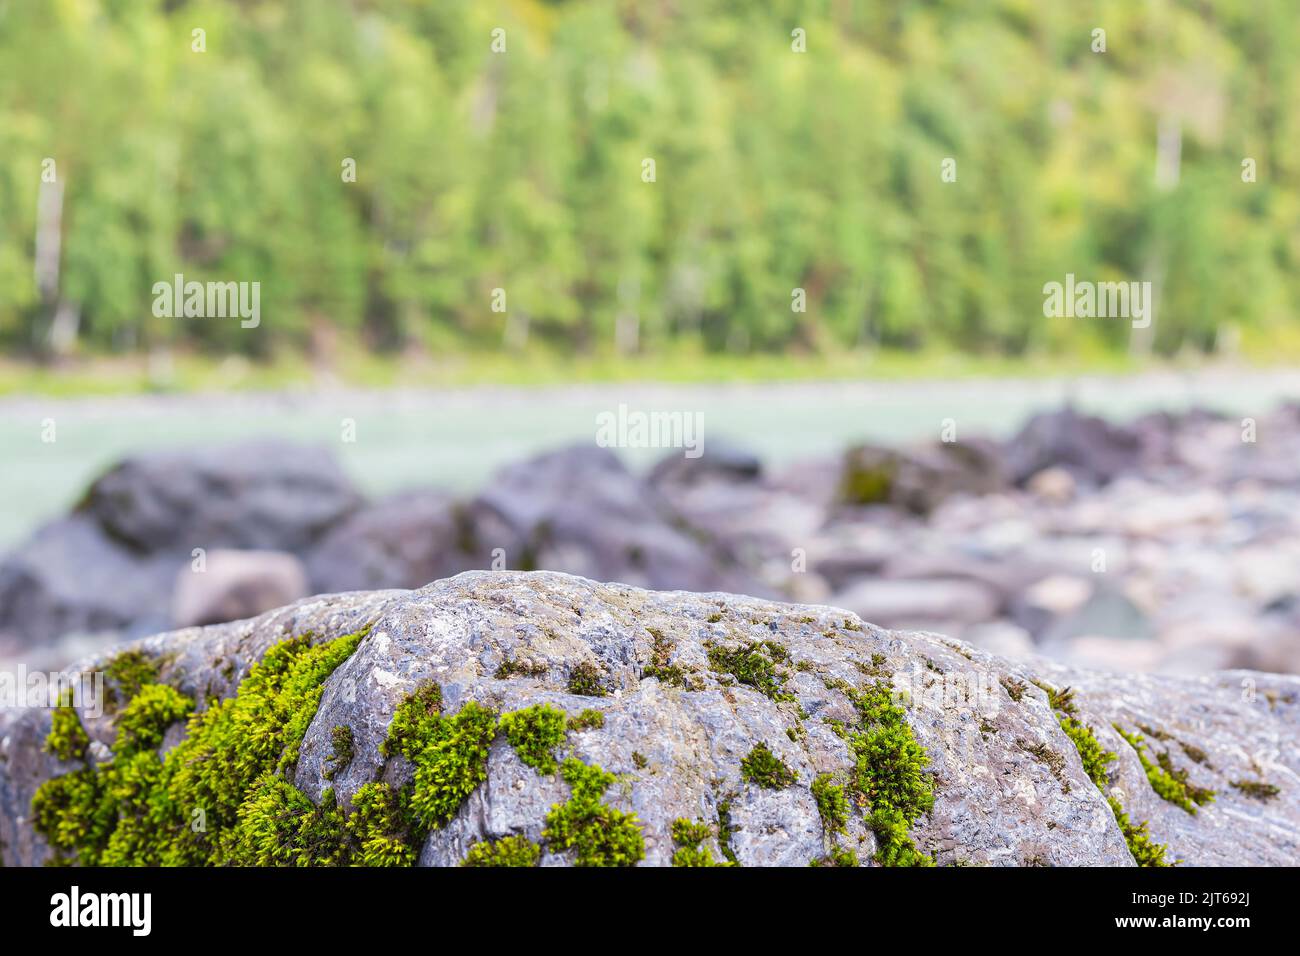 Scenic nature with beautiful mossy boulder on bank of mountain river.Mountain river among stones and trees.Moss on rock face. Relief and texture of st Stock Photo